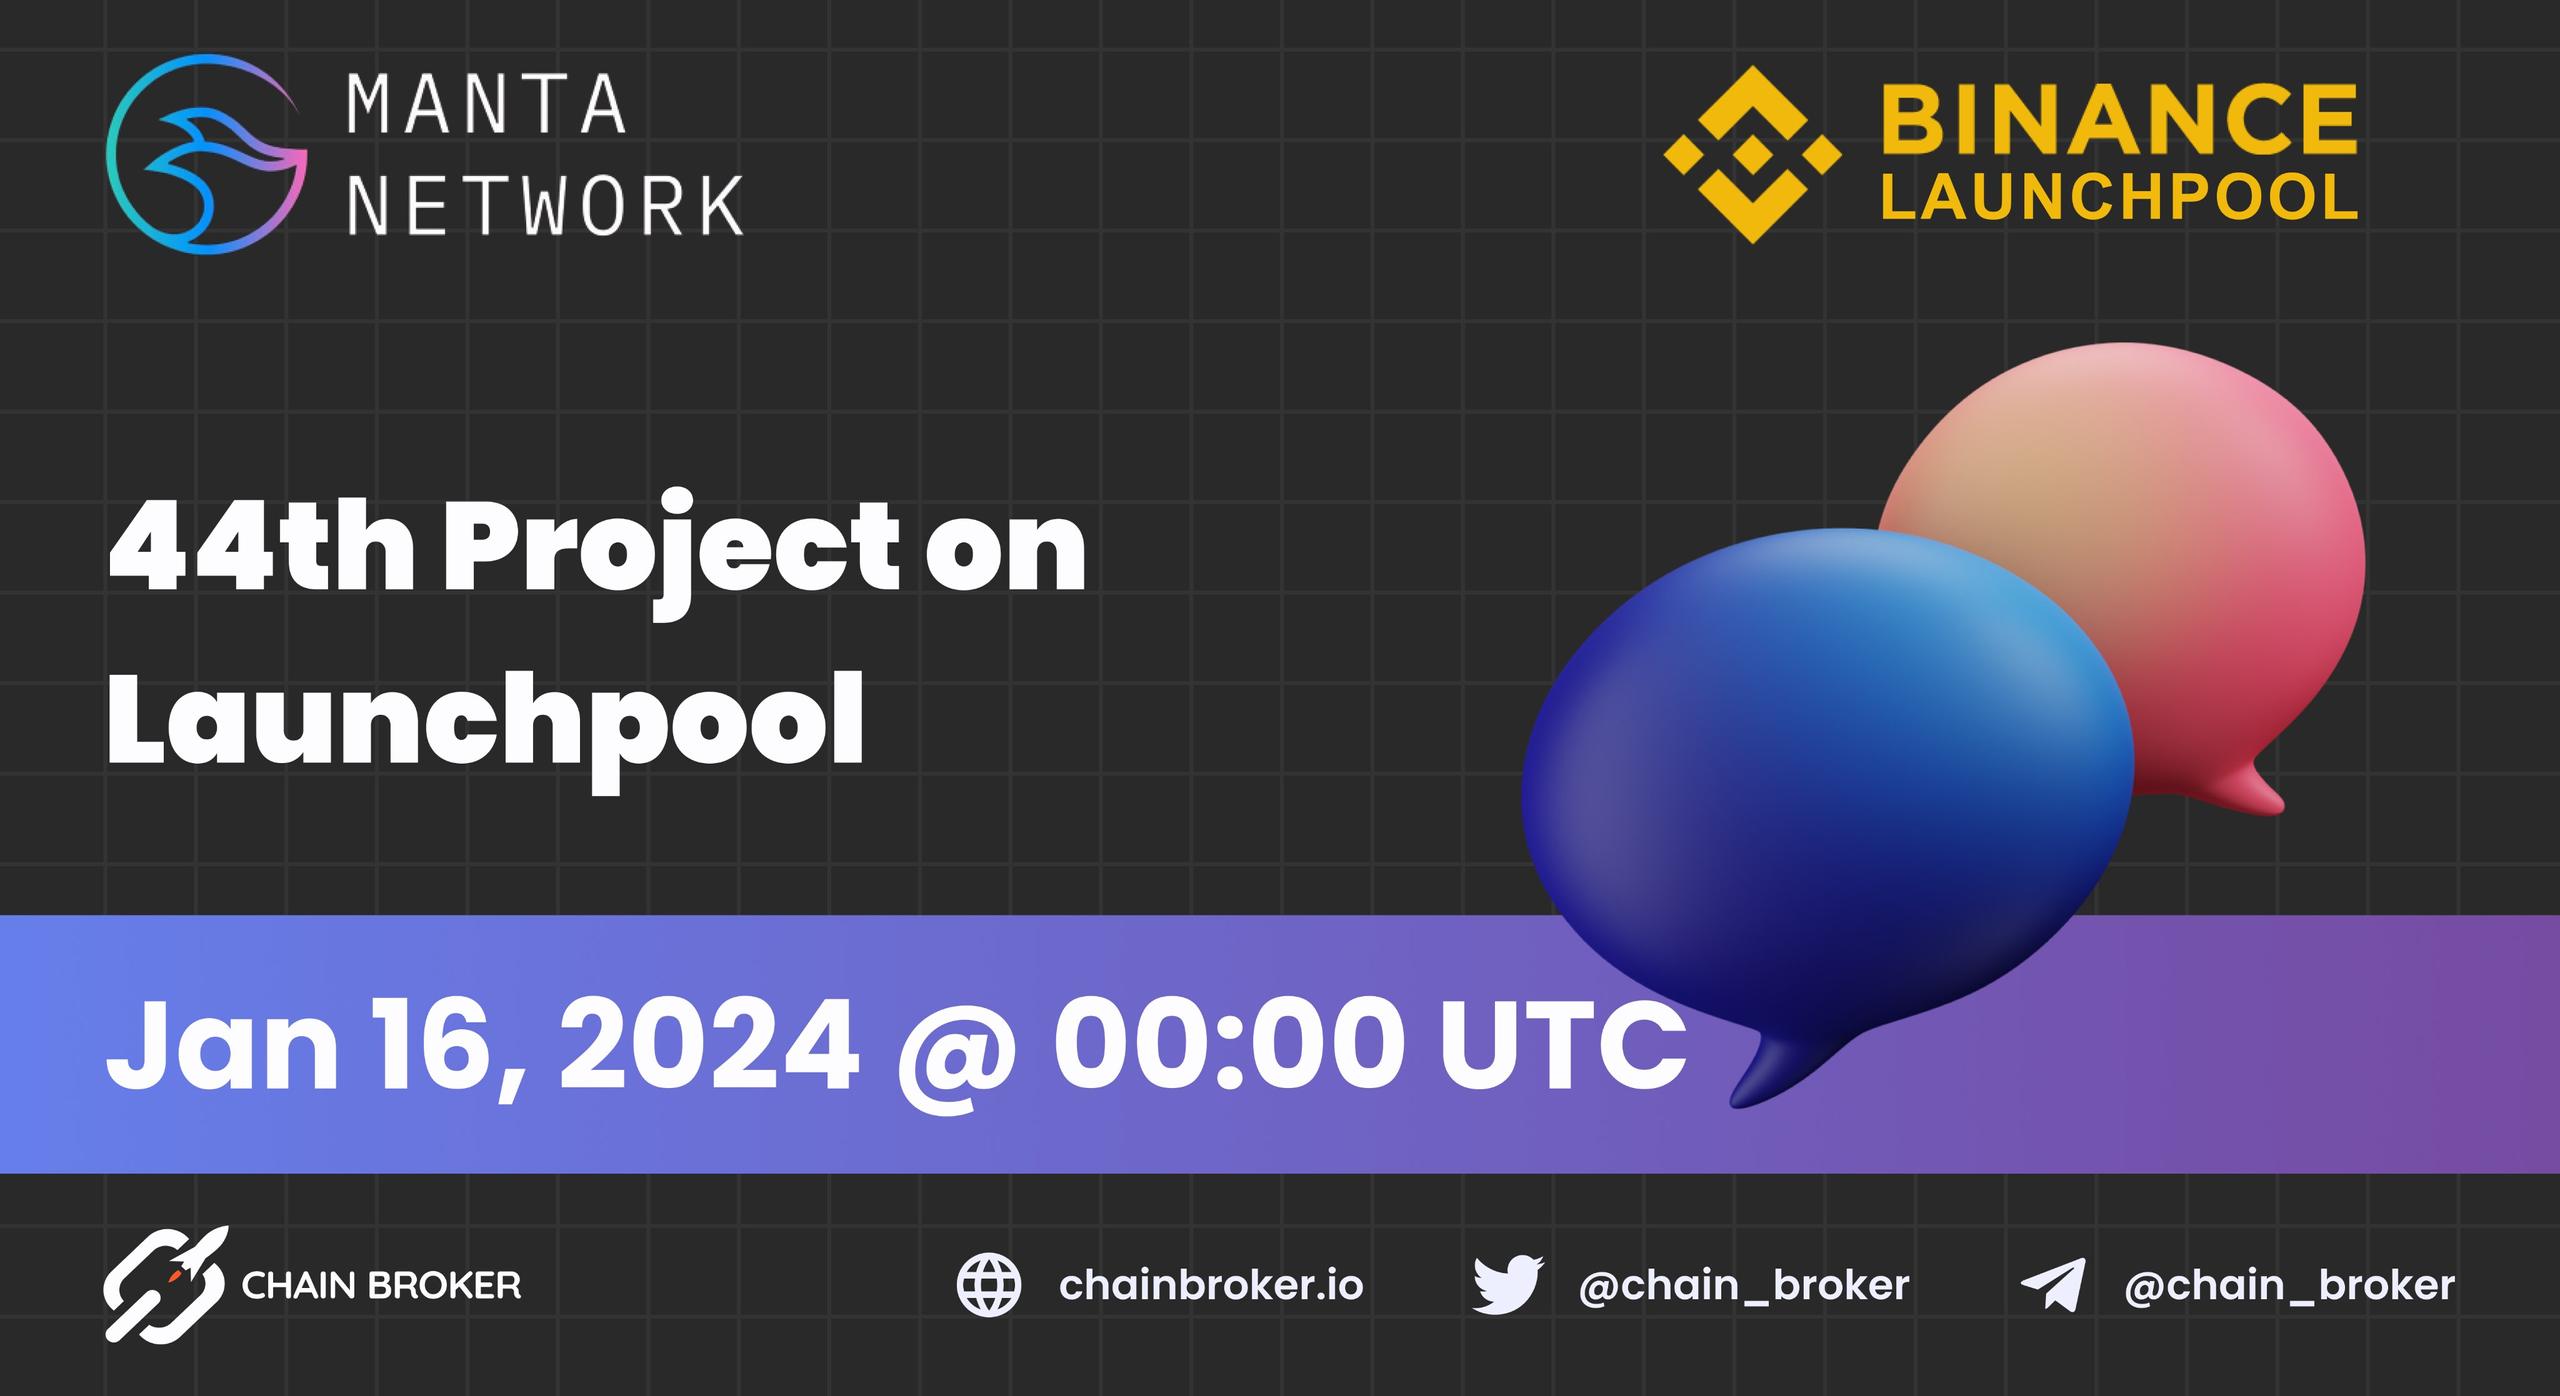 Binance Launchpool Announces its 44th Project